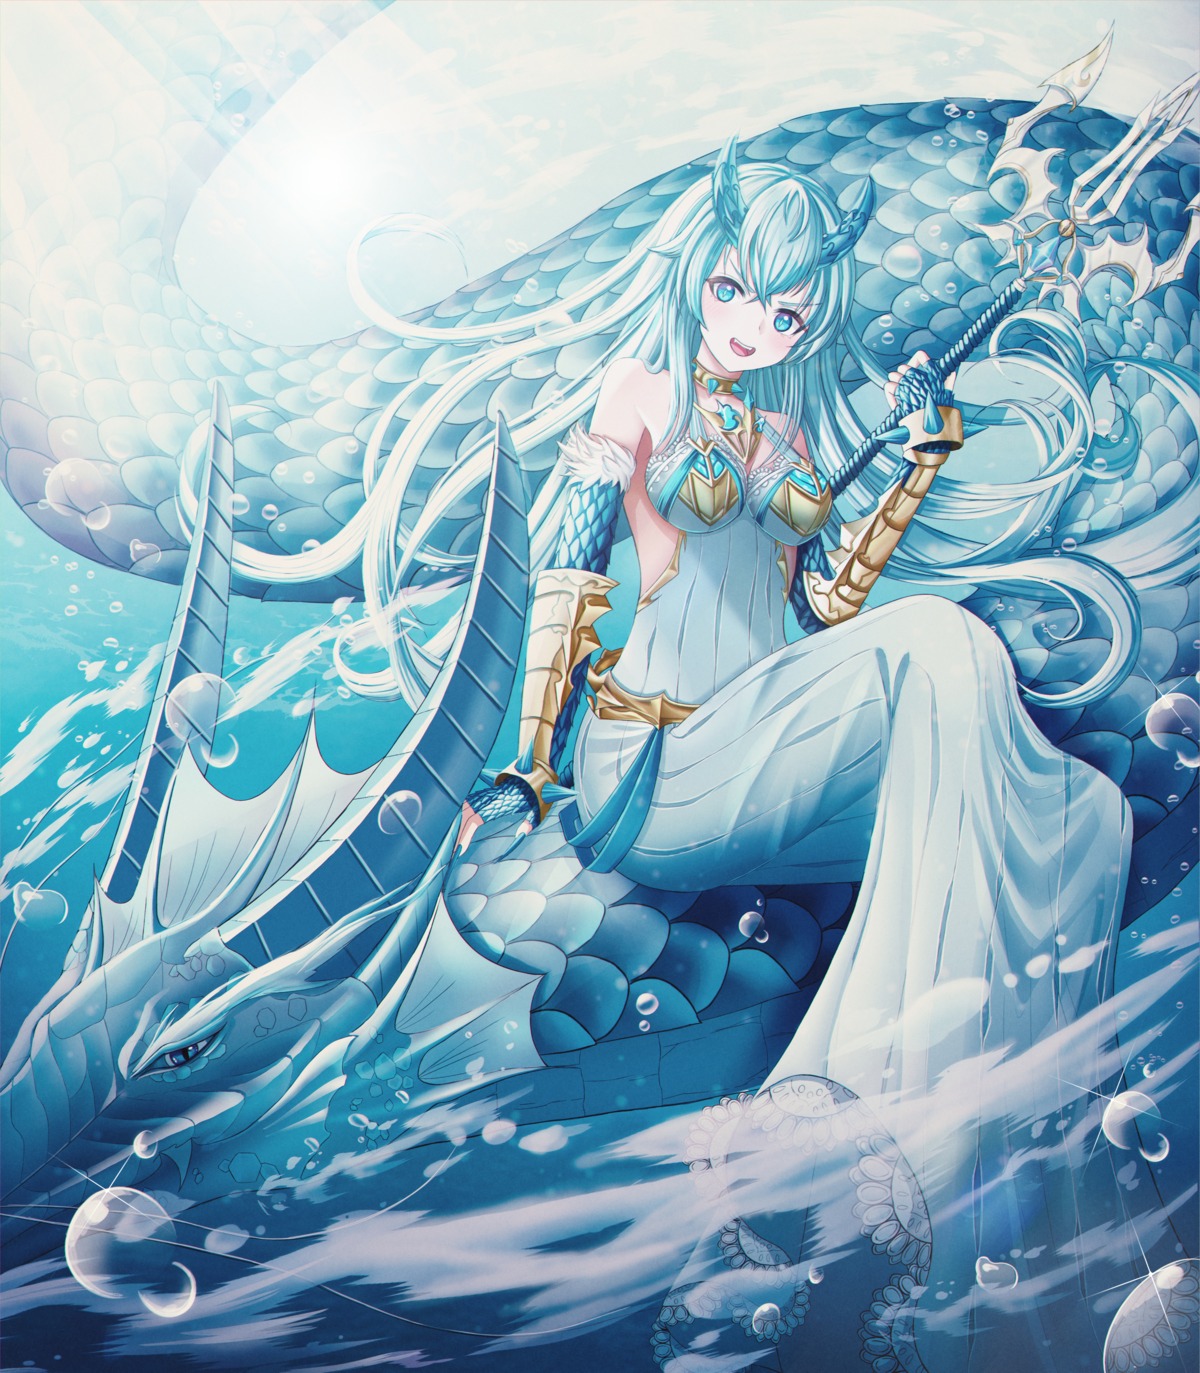 The Water Dragon's Bride” - Supernatural misfortune cannot stop the human  spirit - Animeushi